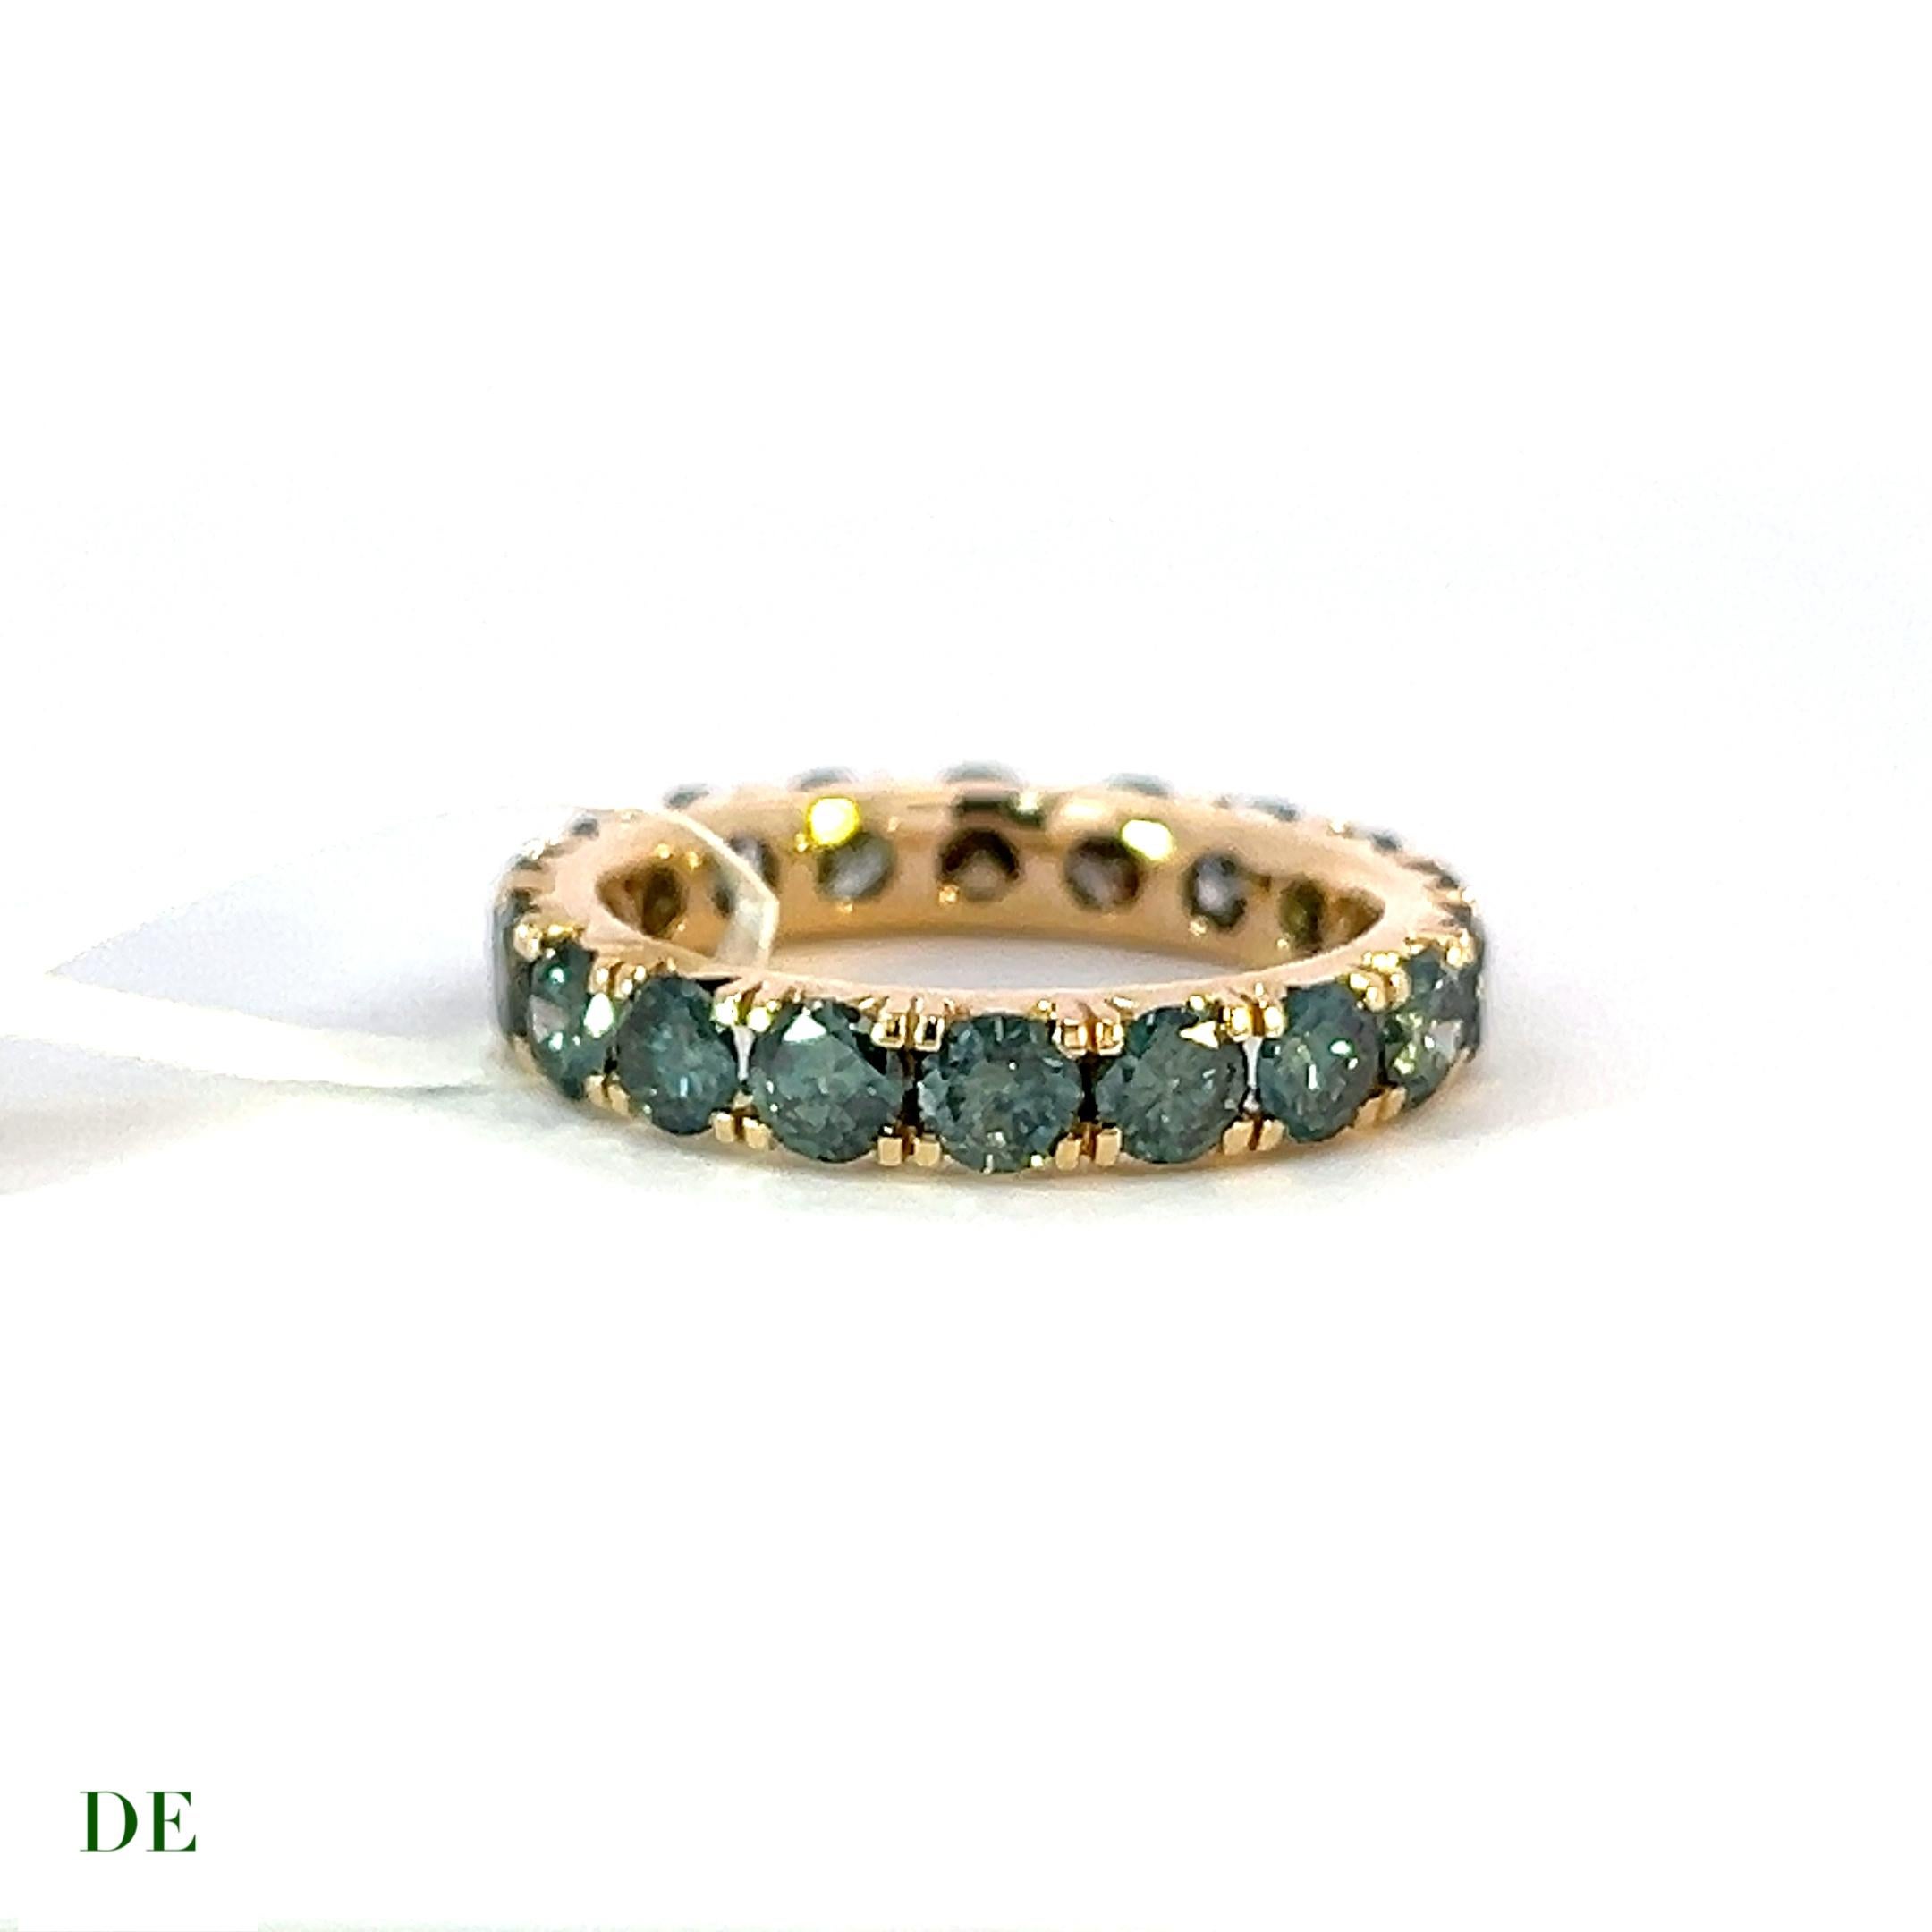 Rare Classic 14k Yellow Gold 3.02 Carat Teal Green Diamond Eternity Band Ring

Introducing the Rare Classic 14k Yellow Gold Teal Green Diamond Eternity Band Ring, a truly remarkable piece that embodies luxury and rarity. This exquisite ring features